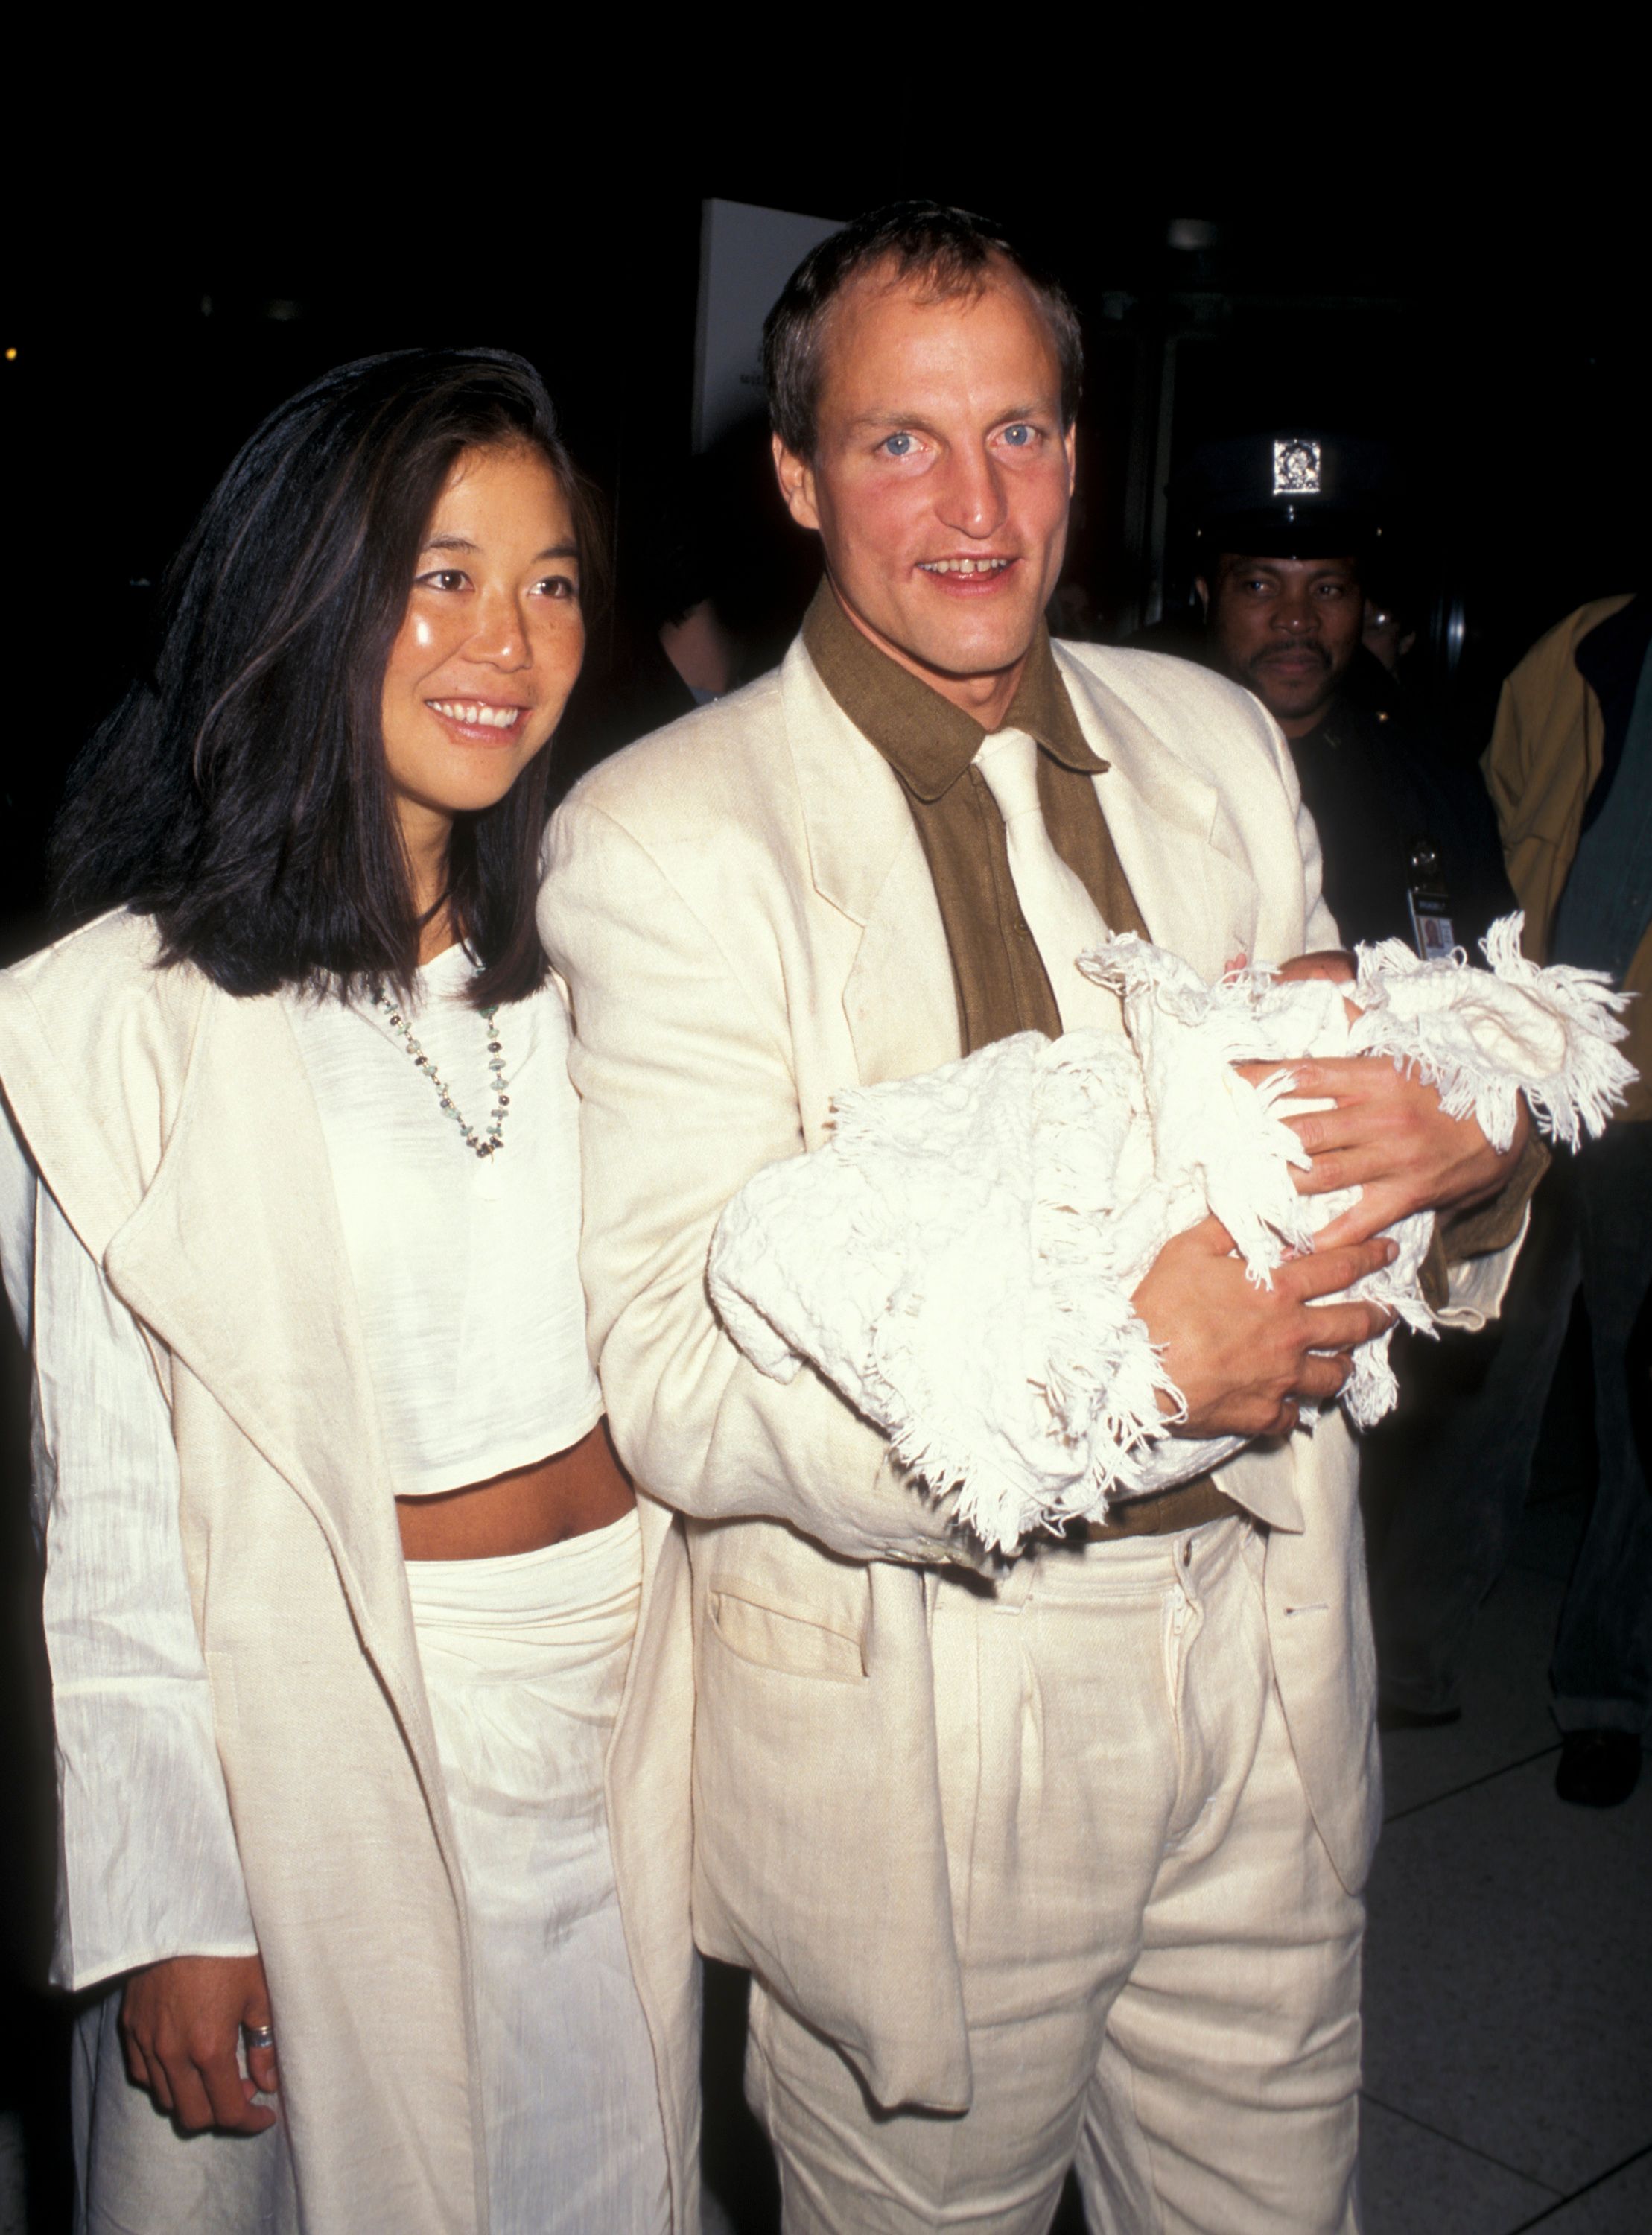 Laura Louie and Woody Harrelson carrying their baby at the NY Film Festival Premiere of "The People vs. Larry Flynt" on  October 13, 1996 | Photo: Ron Galella/Ron Galella Collection/Getty Images